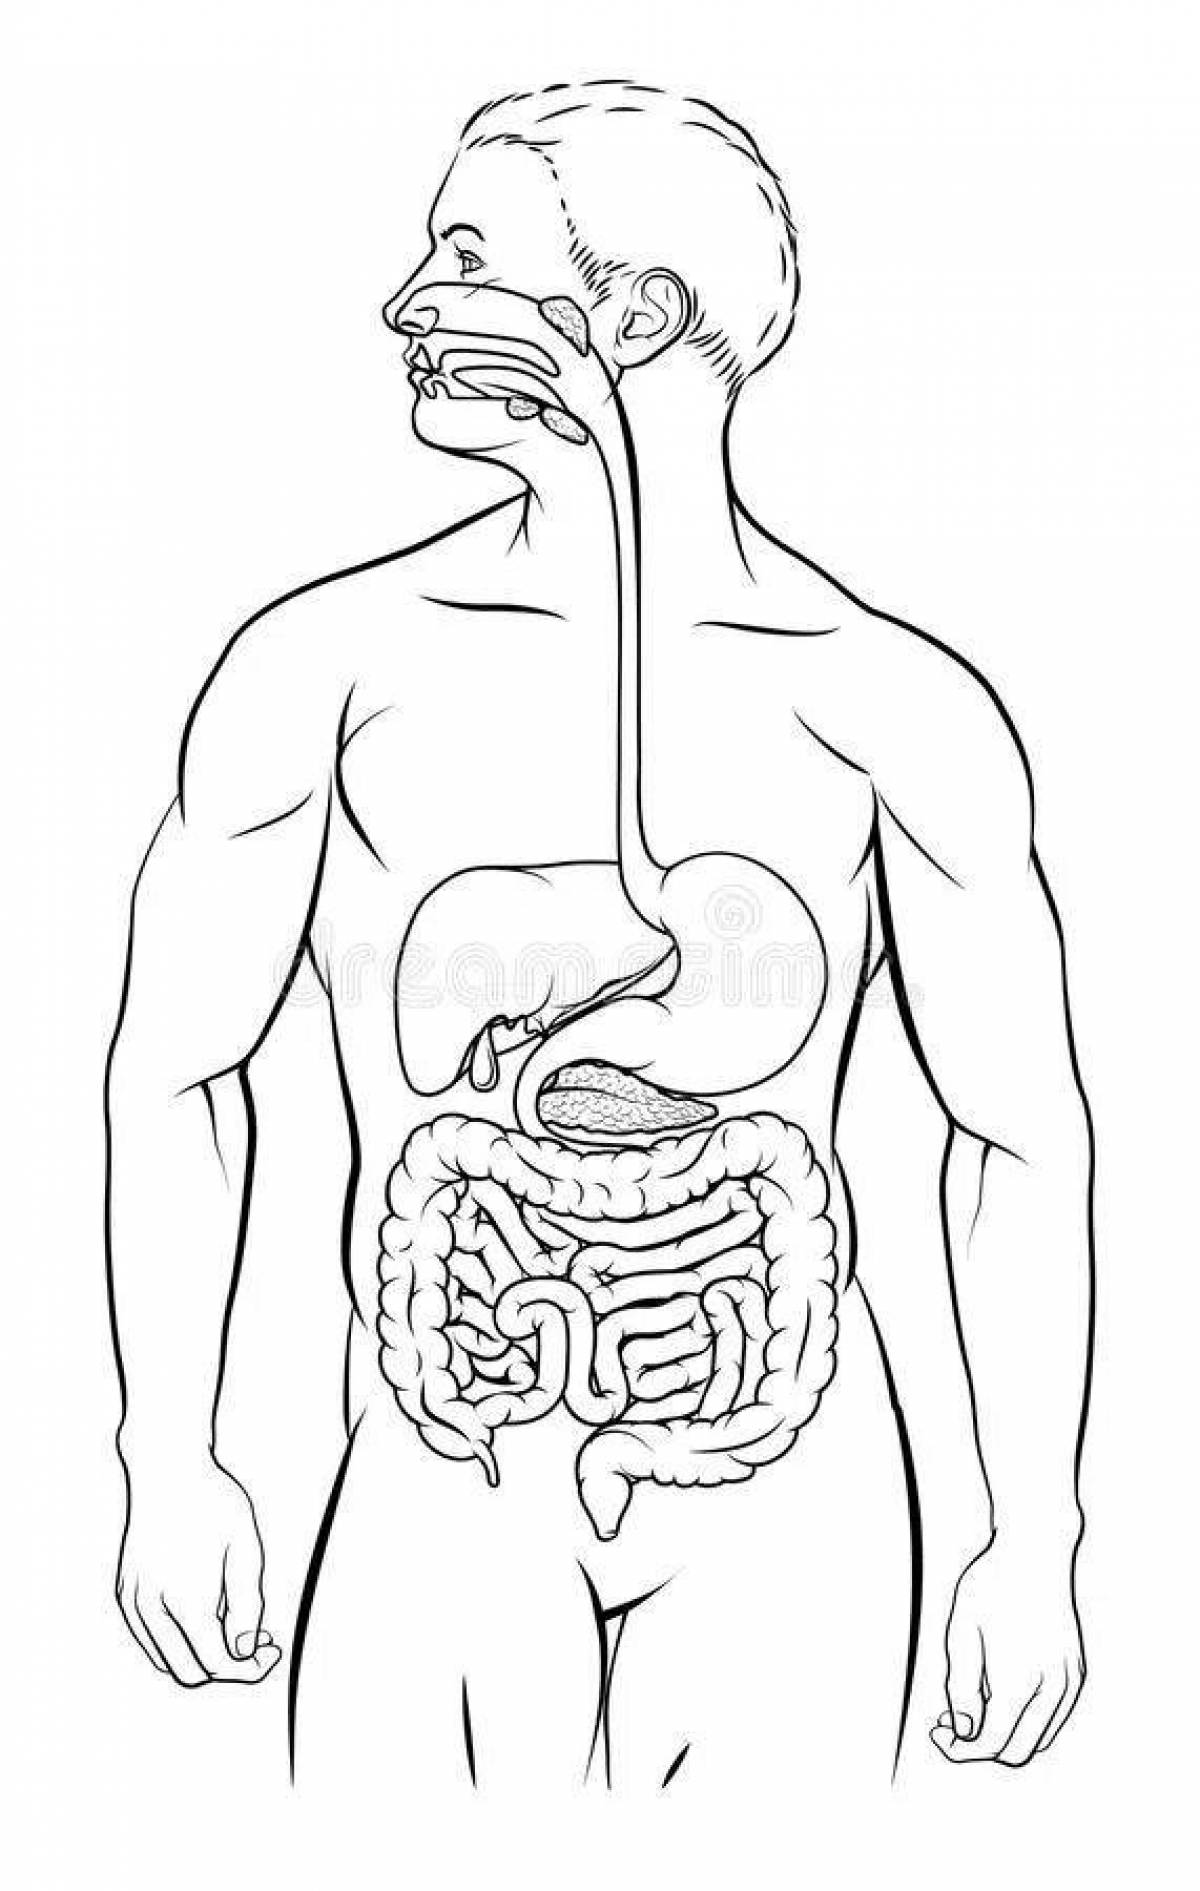 Coloring book innovative digestive system